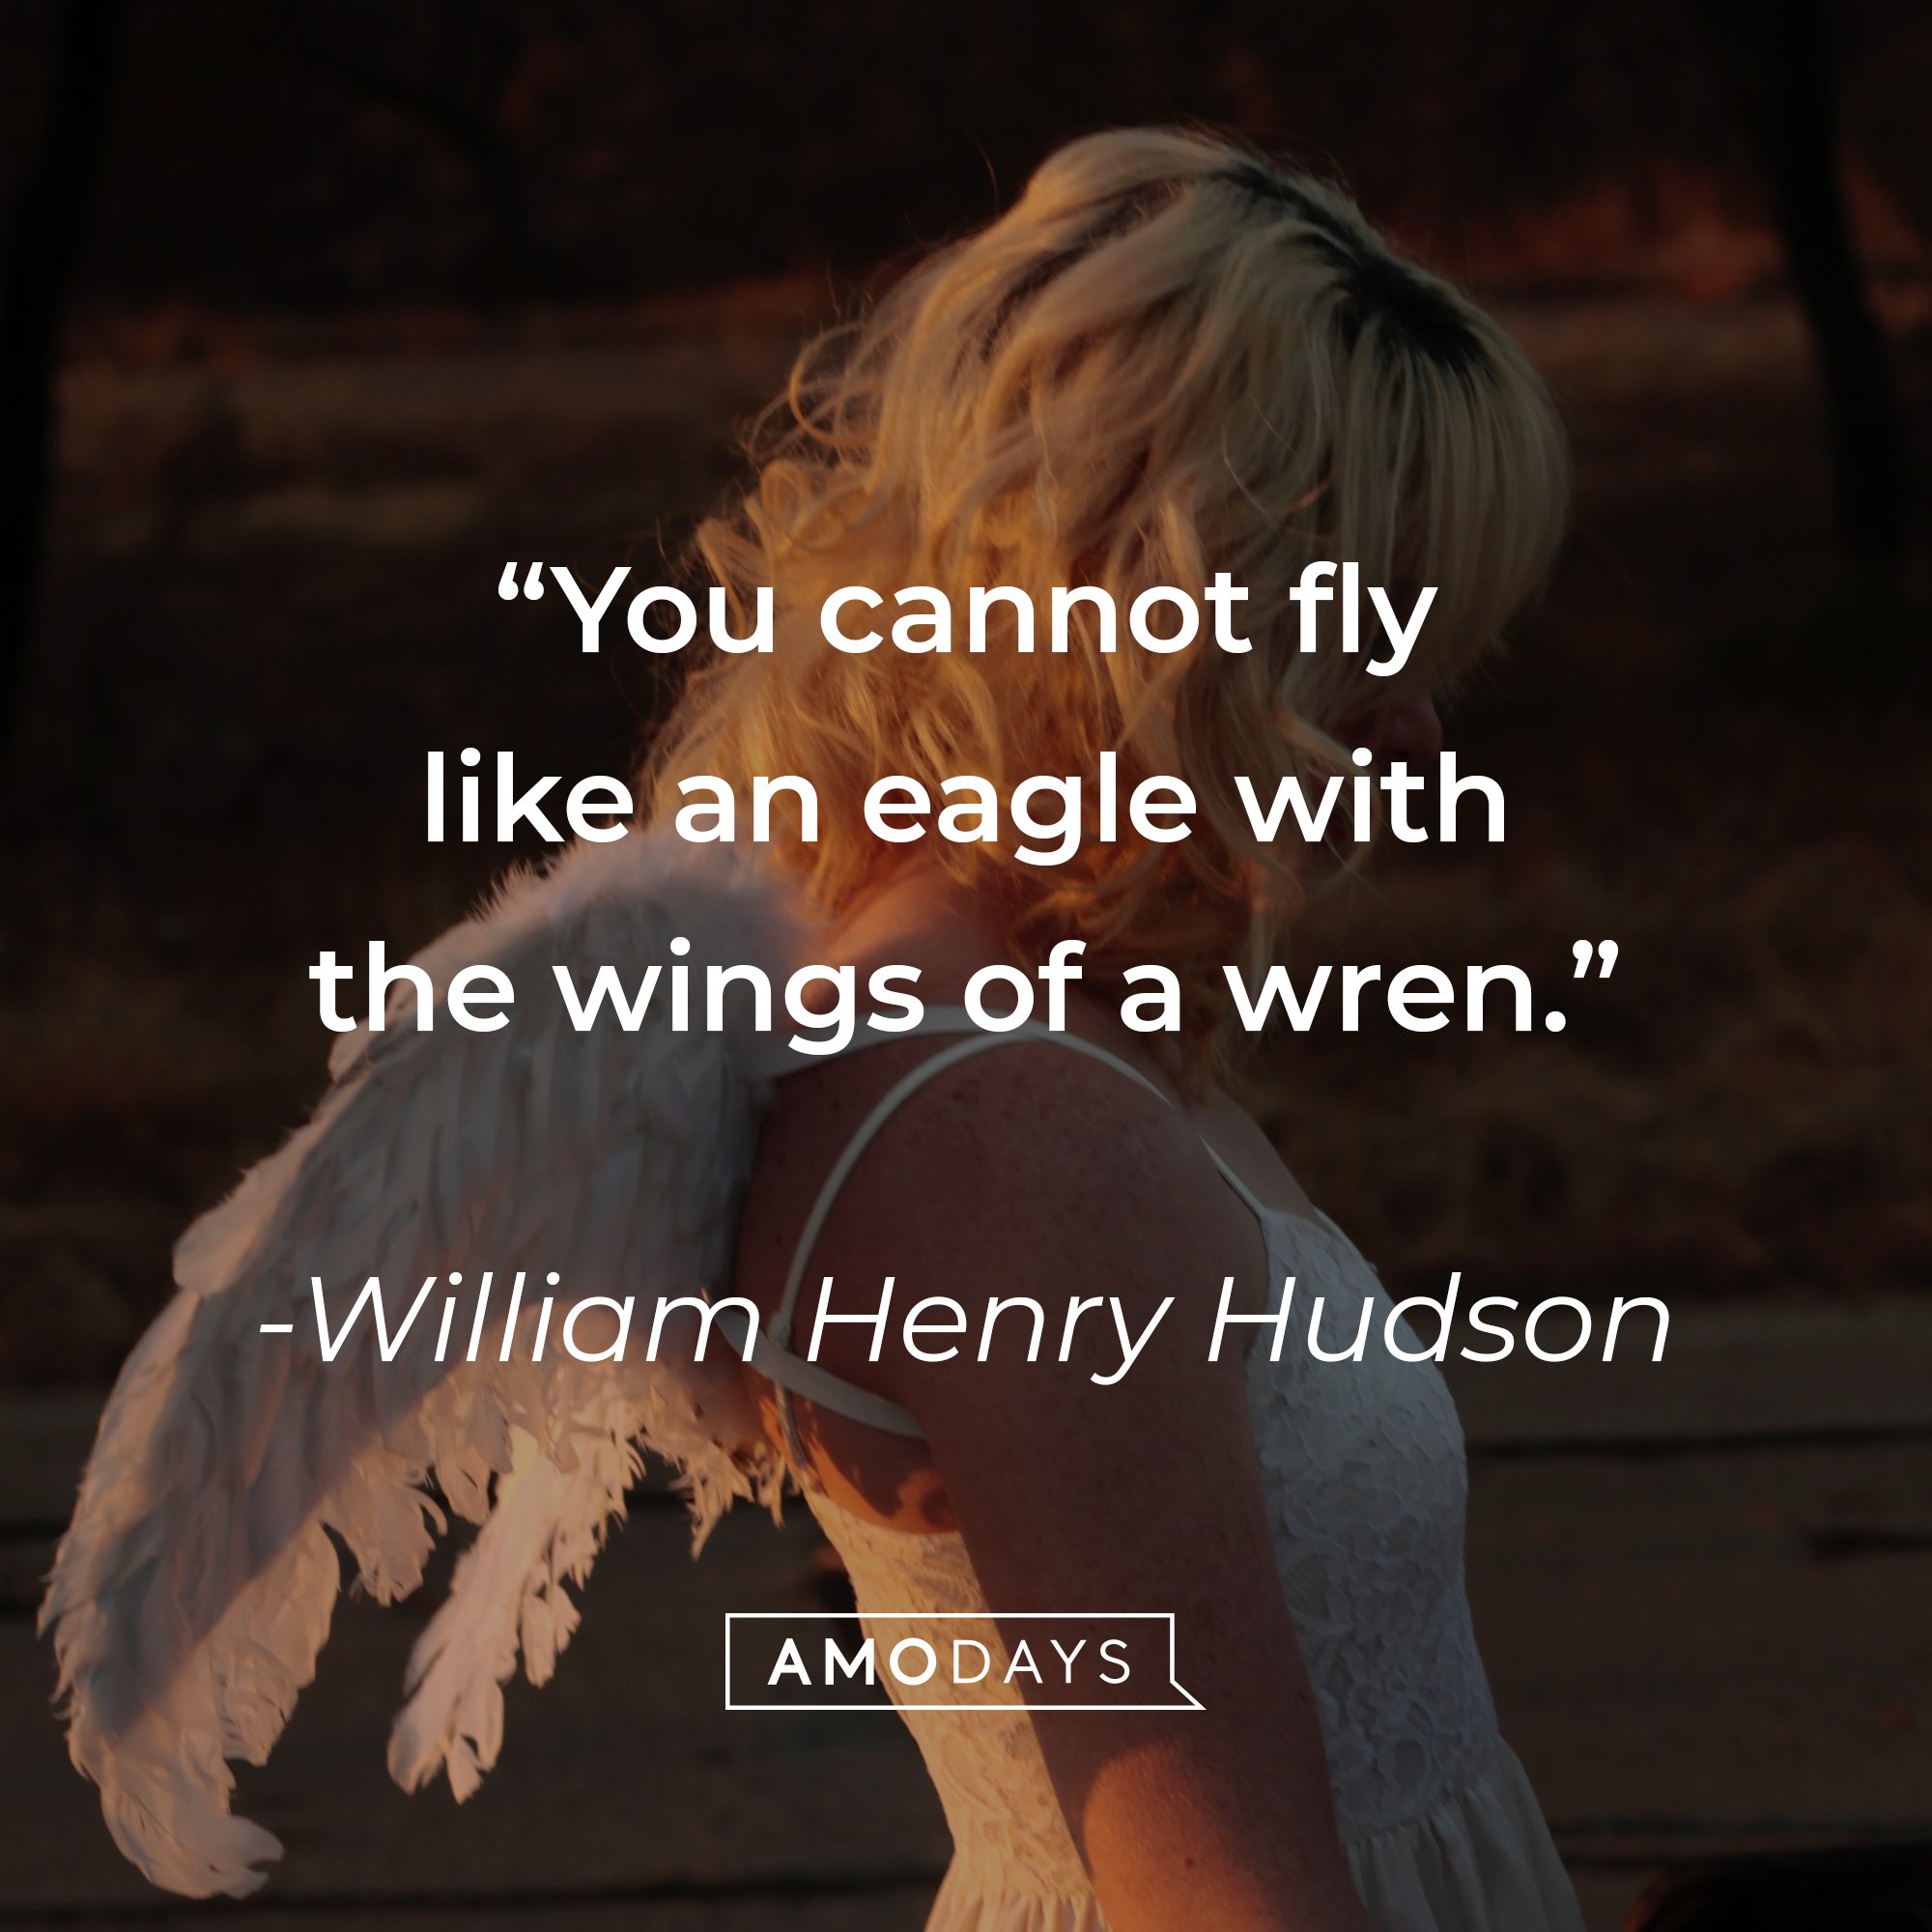 William Henry Hudson's quote: "You cannot fly like an eagle with the wings of a wren." | Image: AmoDays